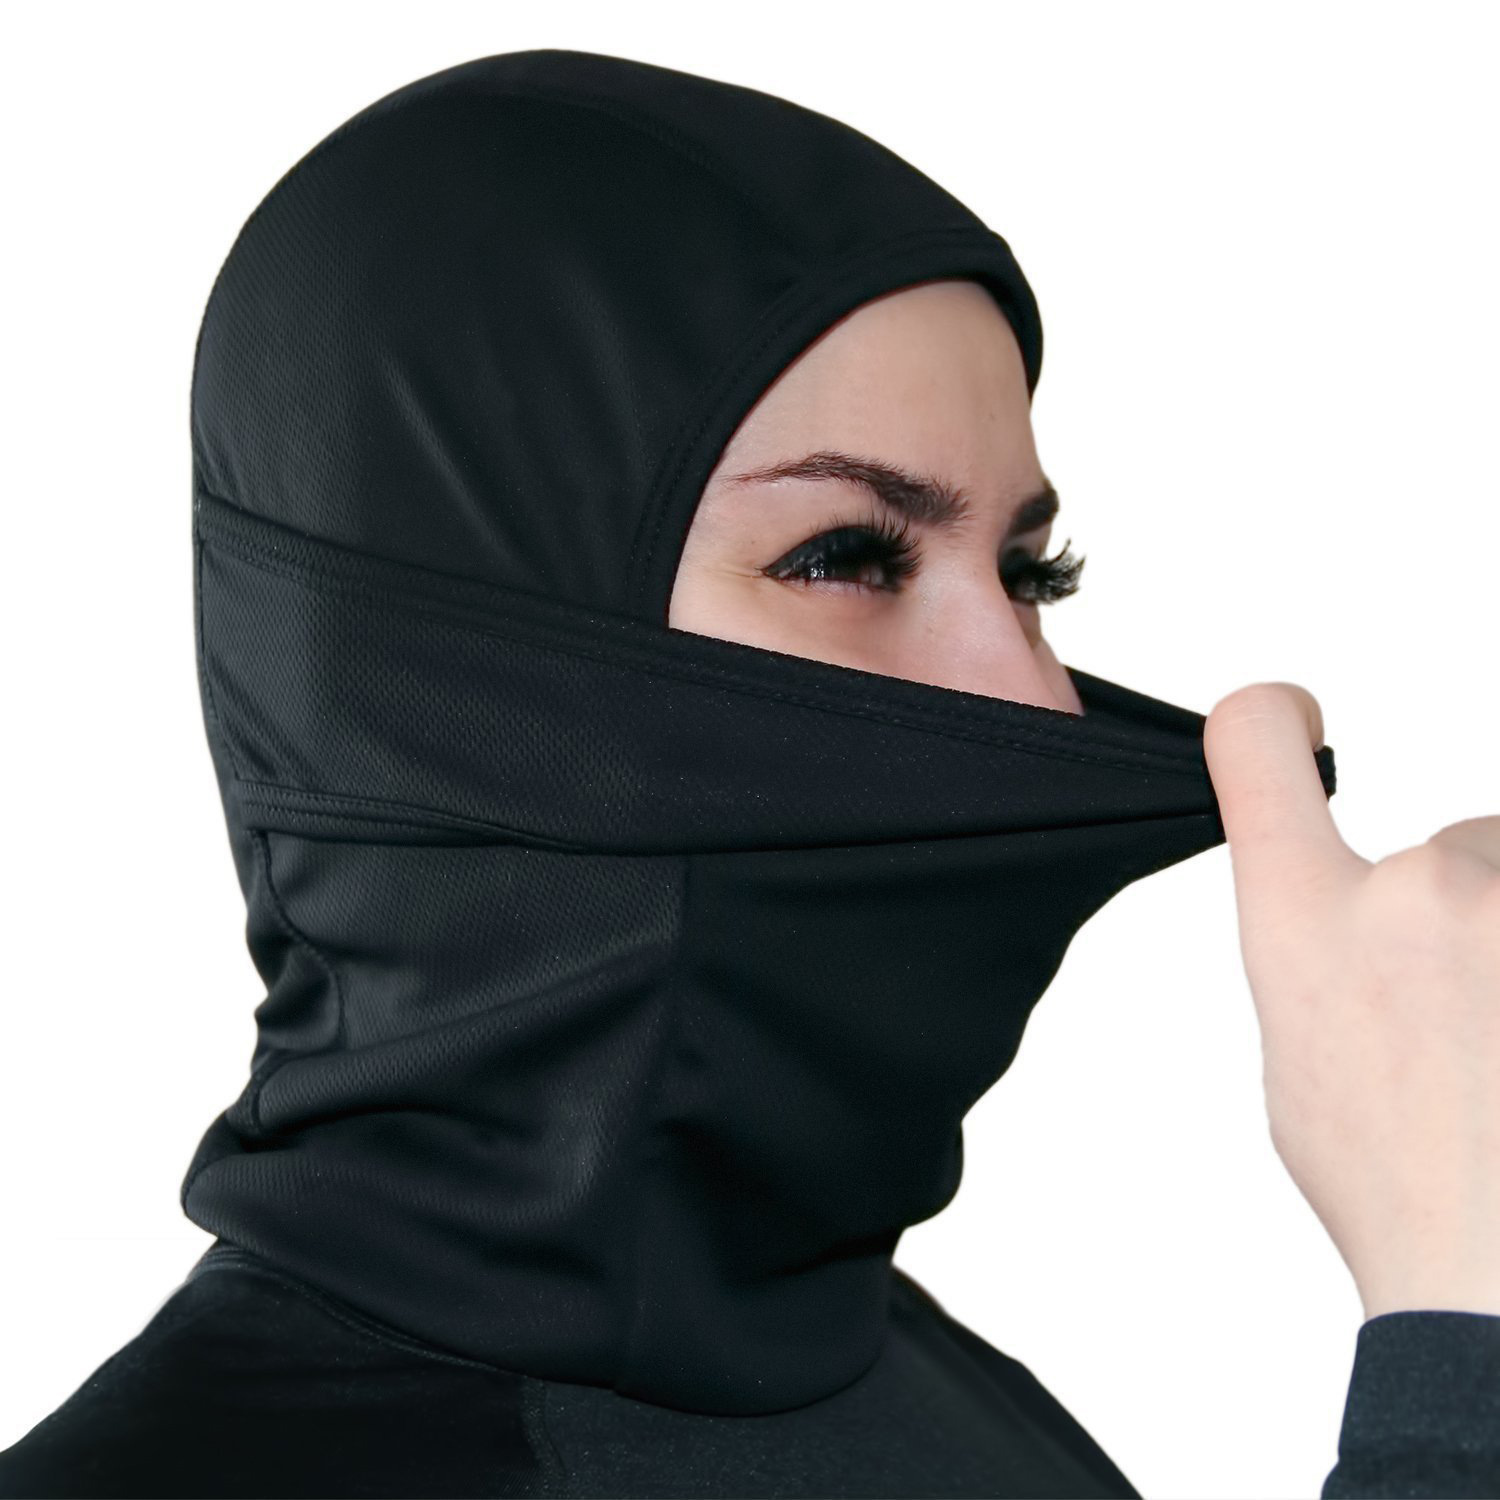 Ultimate-Thermal-Retention-Windproof-Ski-Tactical-Mask-Cold-Weather-Face-Mask-Neck-Warmer-1241597